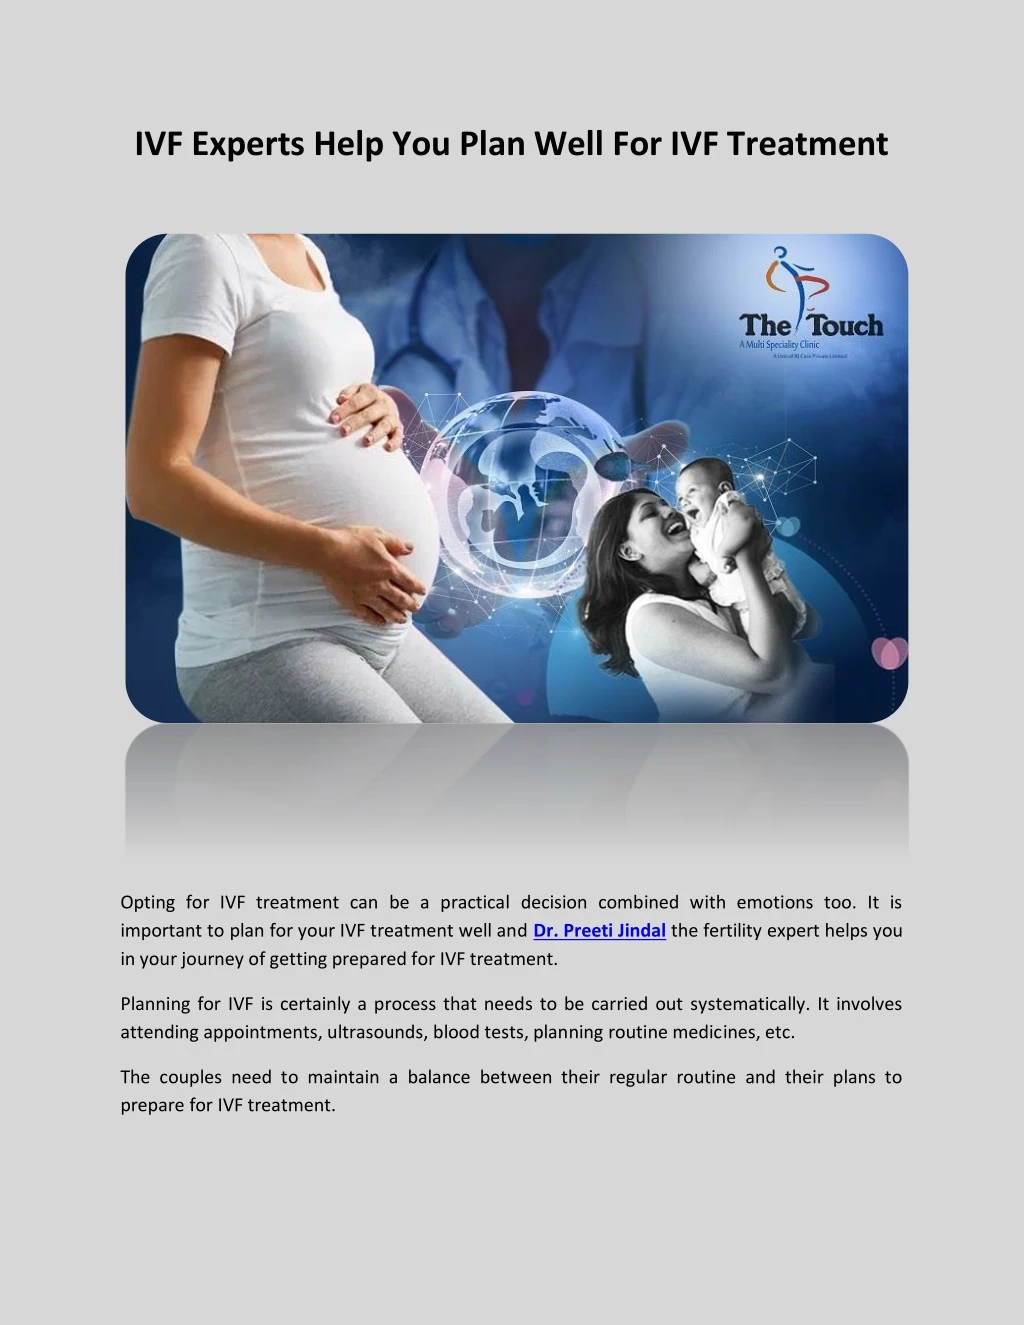 ivf experts help you plan well for ivf treatment